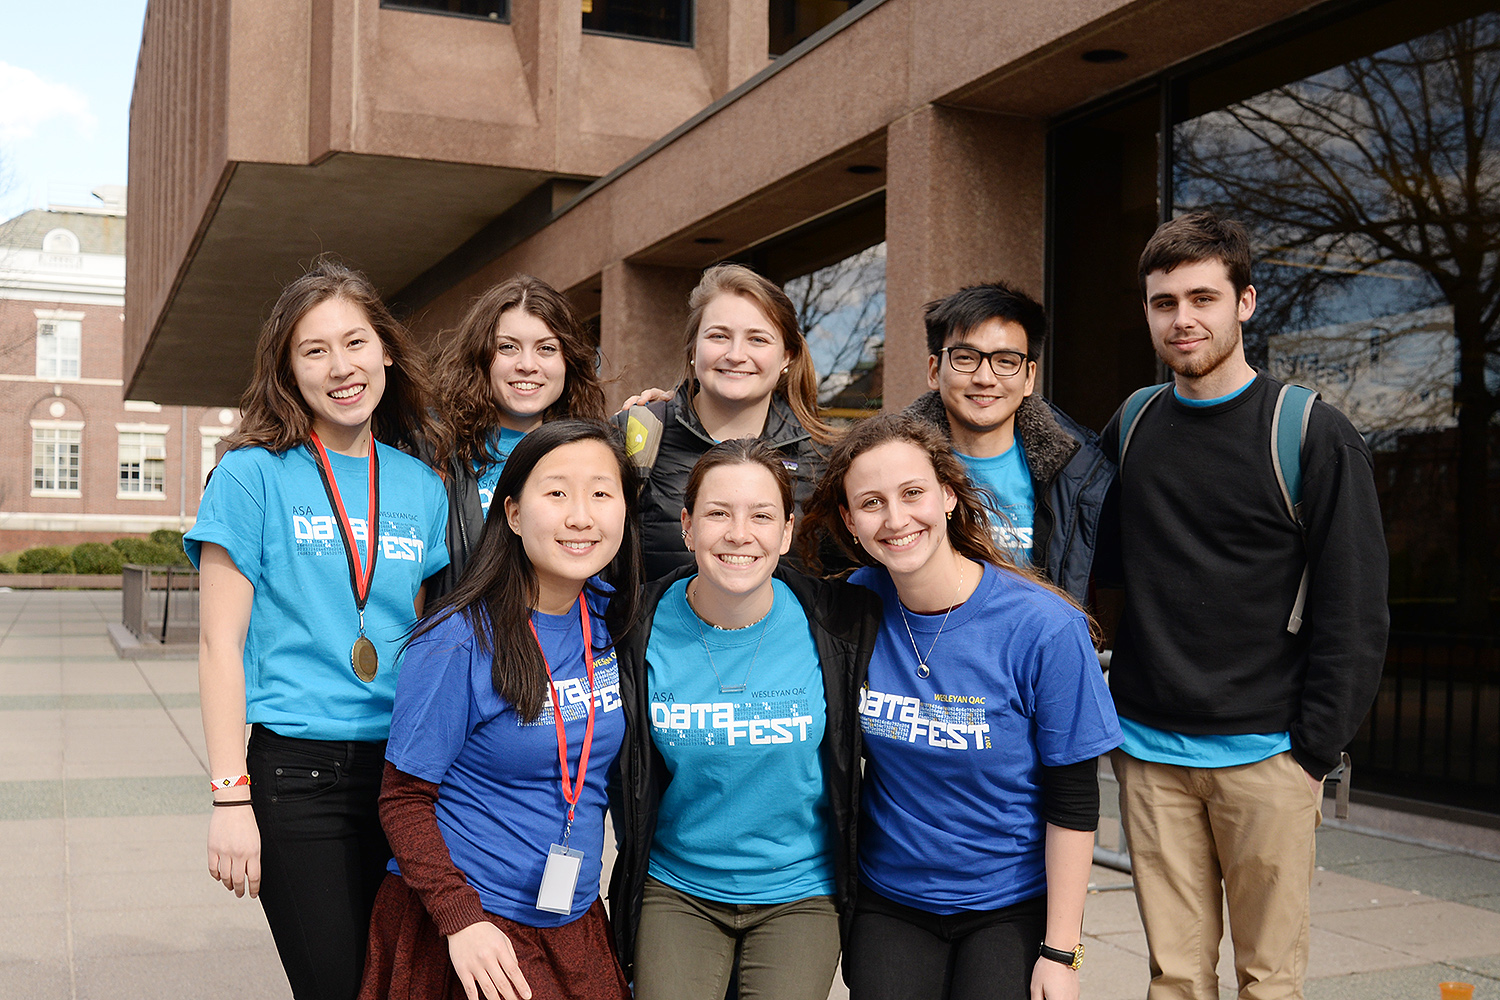 Students gathered outside Exley following DataFest. (Photos by Will Barr '18)